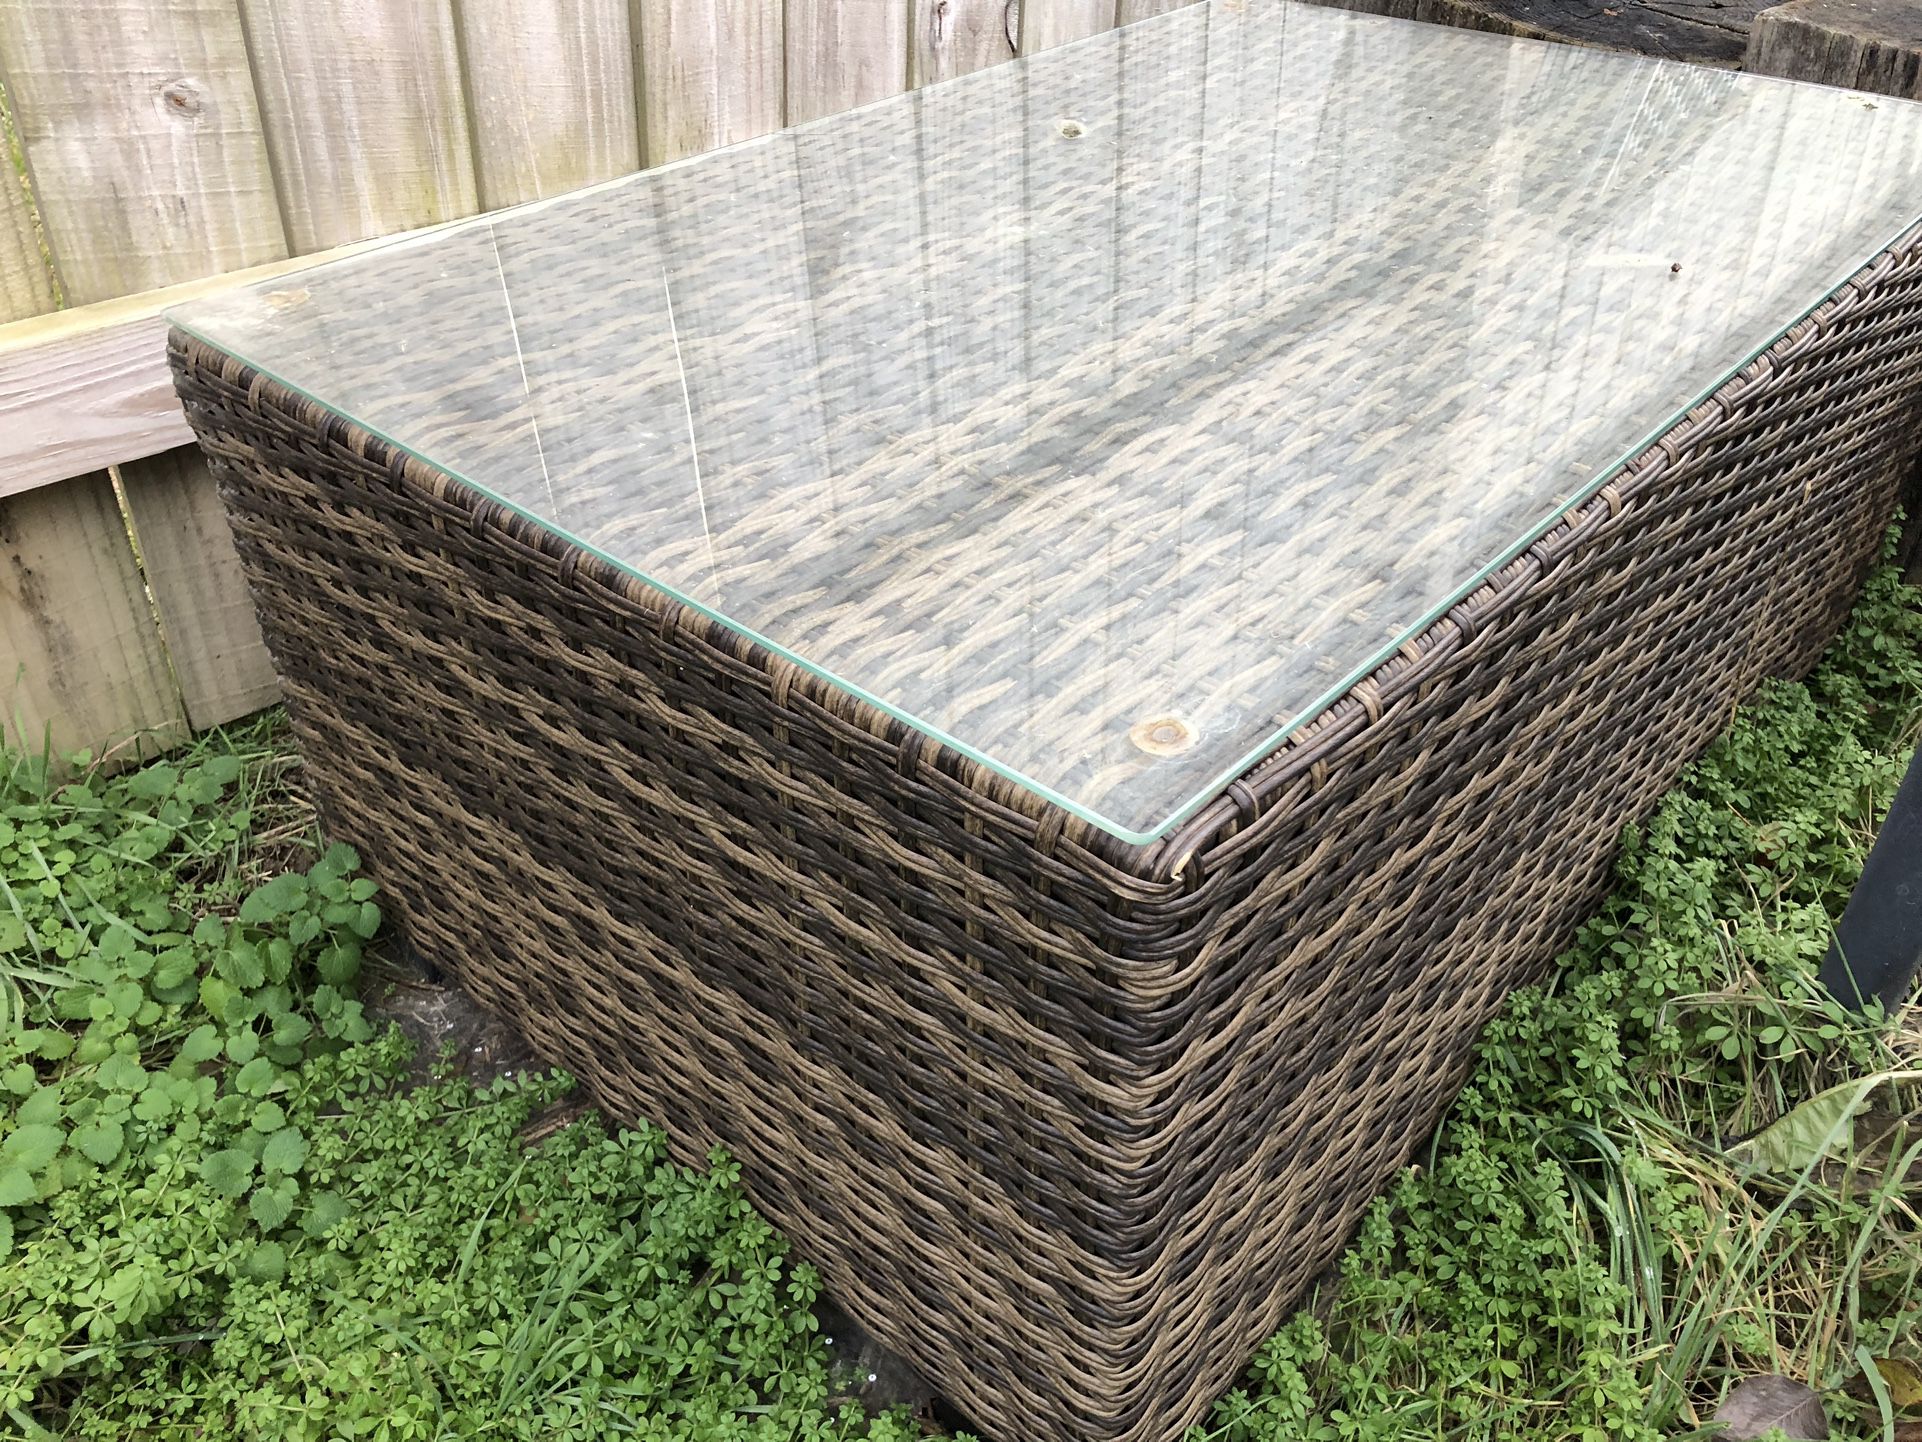 Wicker and glass table - 39.5 x 26 x 16.5 tall